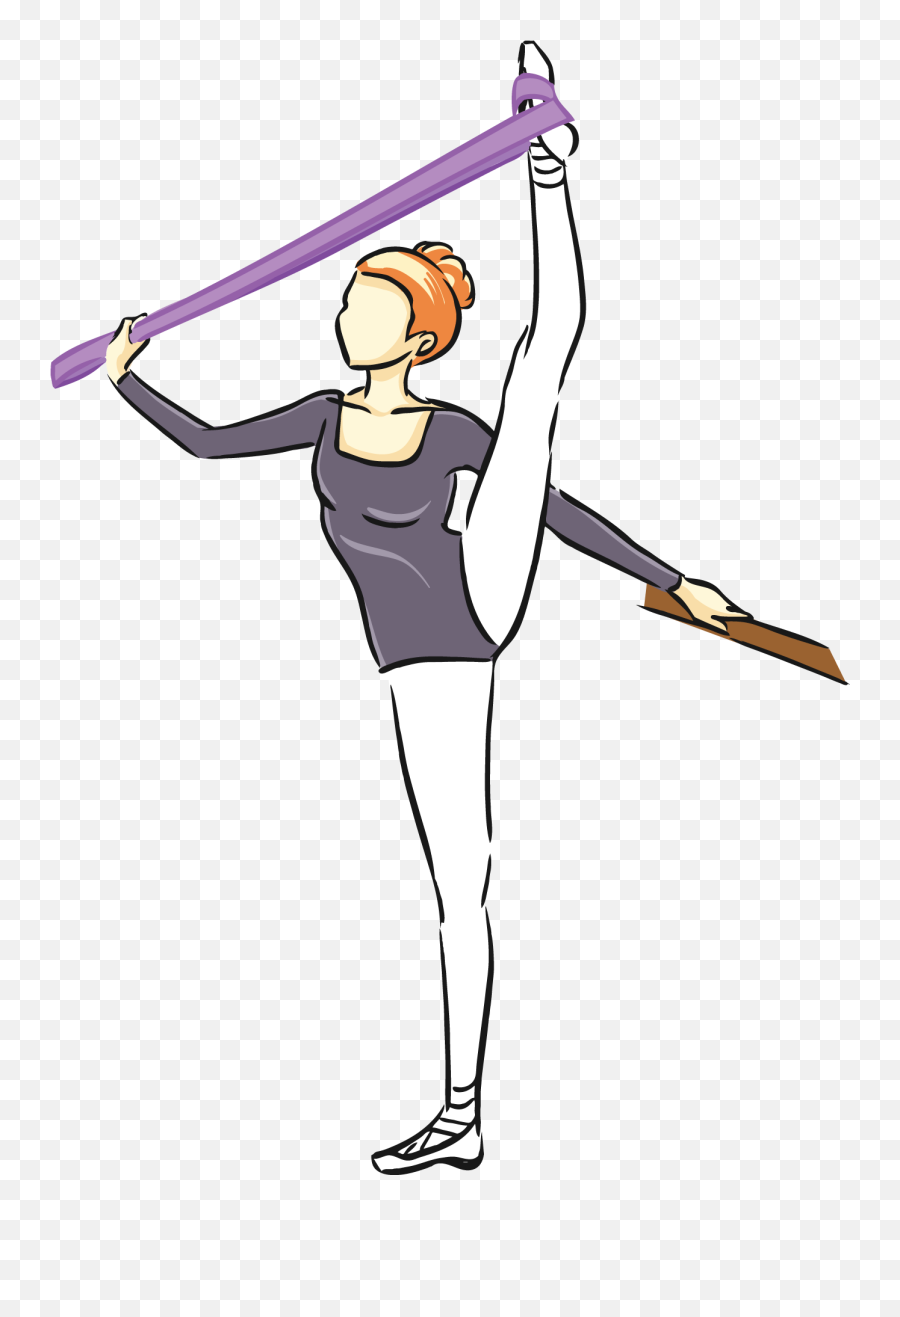 Cheer Drawing Heel Stretch - Stretching Clipart Full Size Stretches To Do With A Plum Band Emoji,Cheer Megaphones Clipart